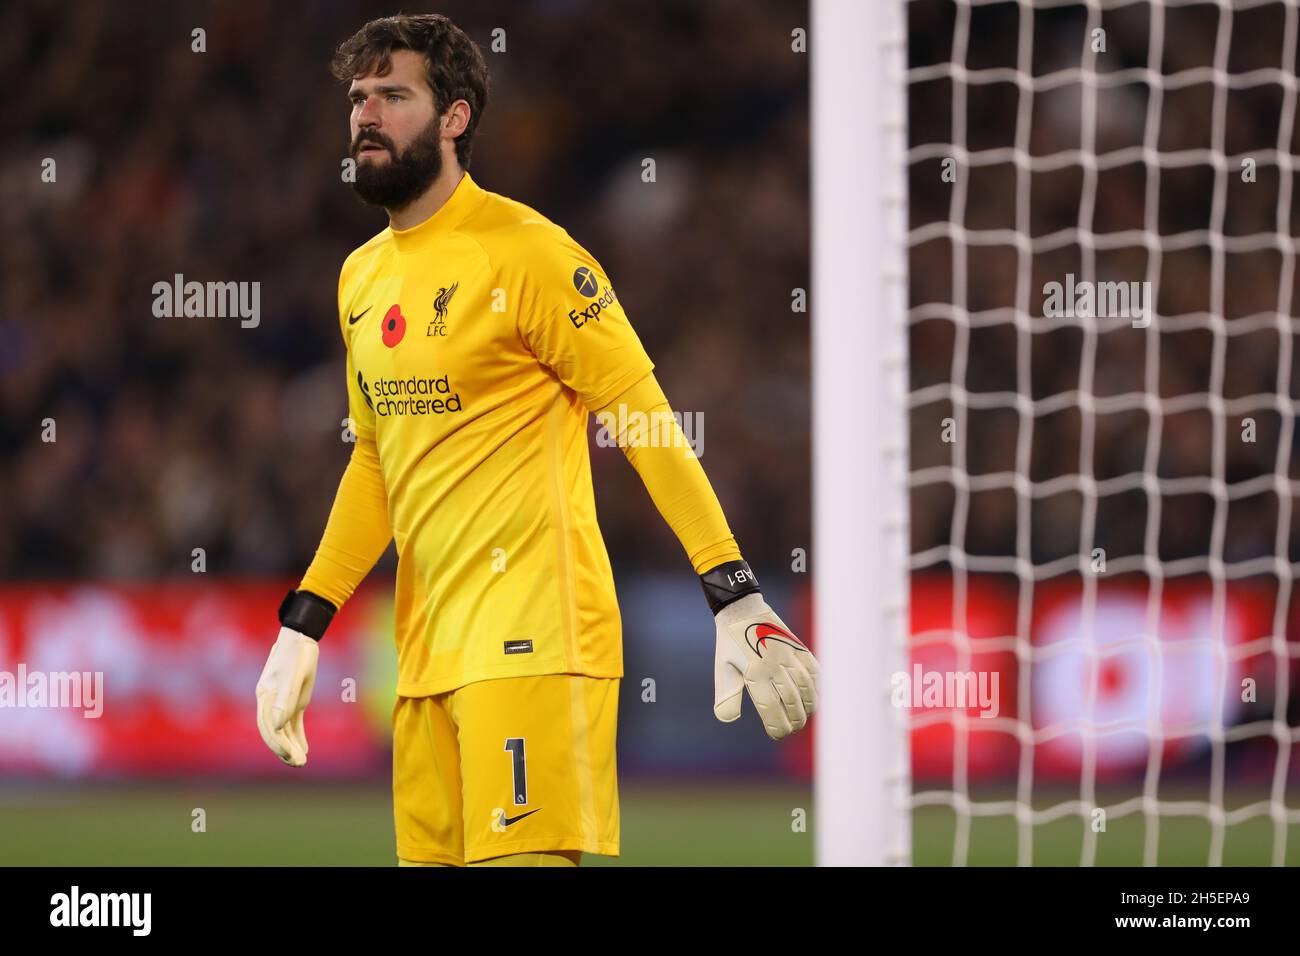 Alisson becker liverpool hi-res stock photography and images - Page 6 -  Alamy